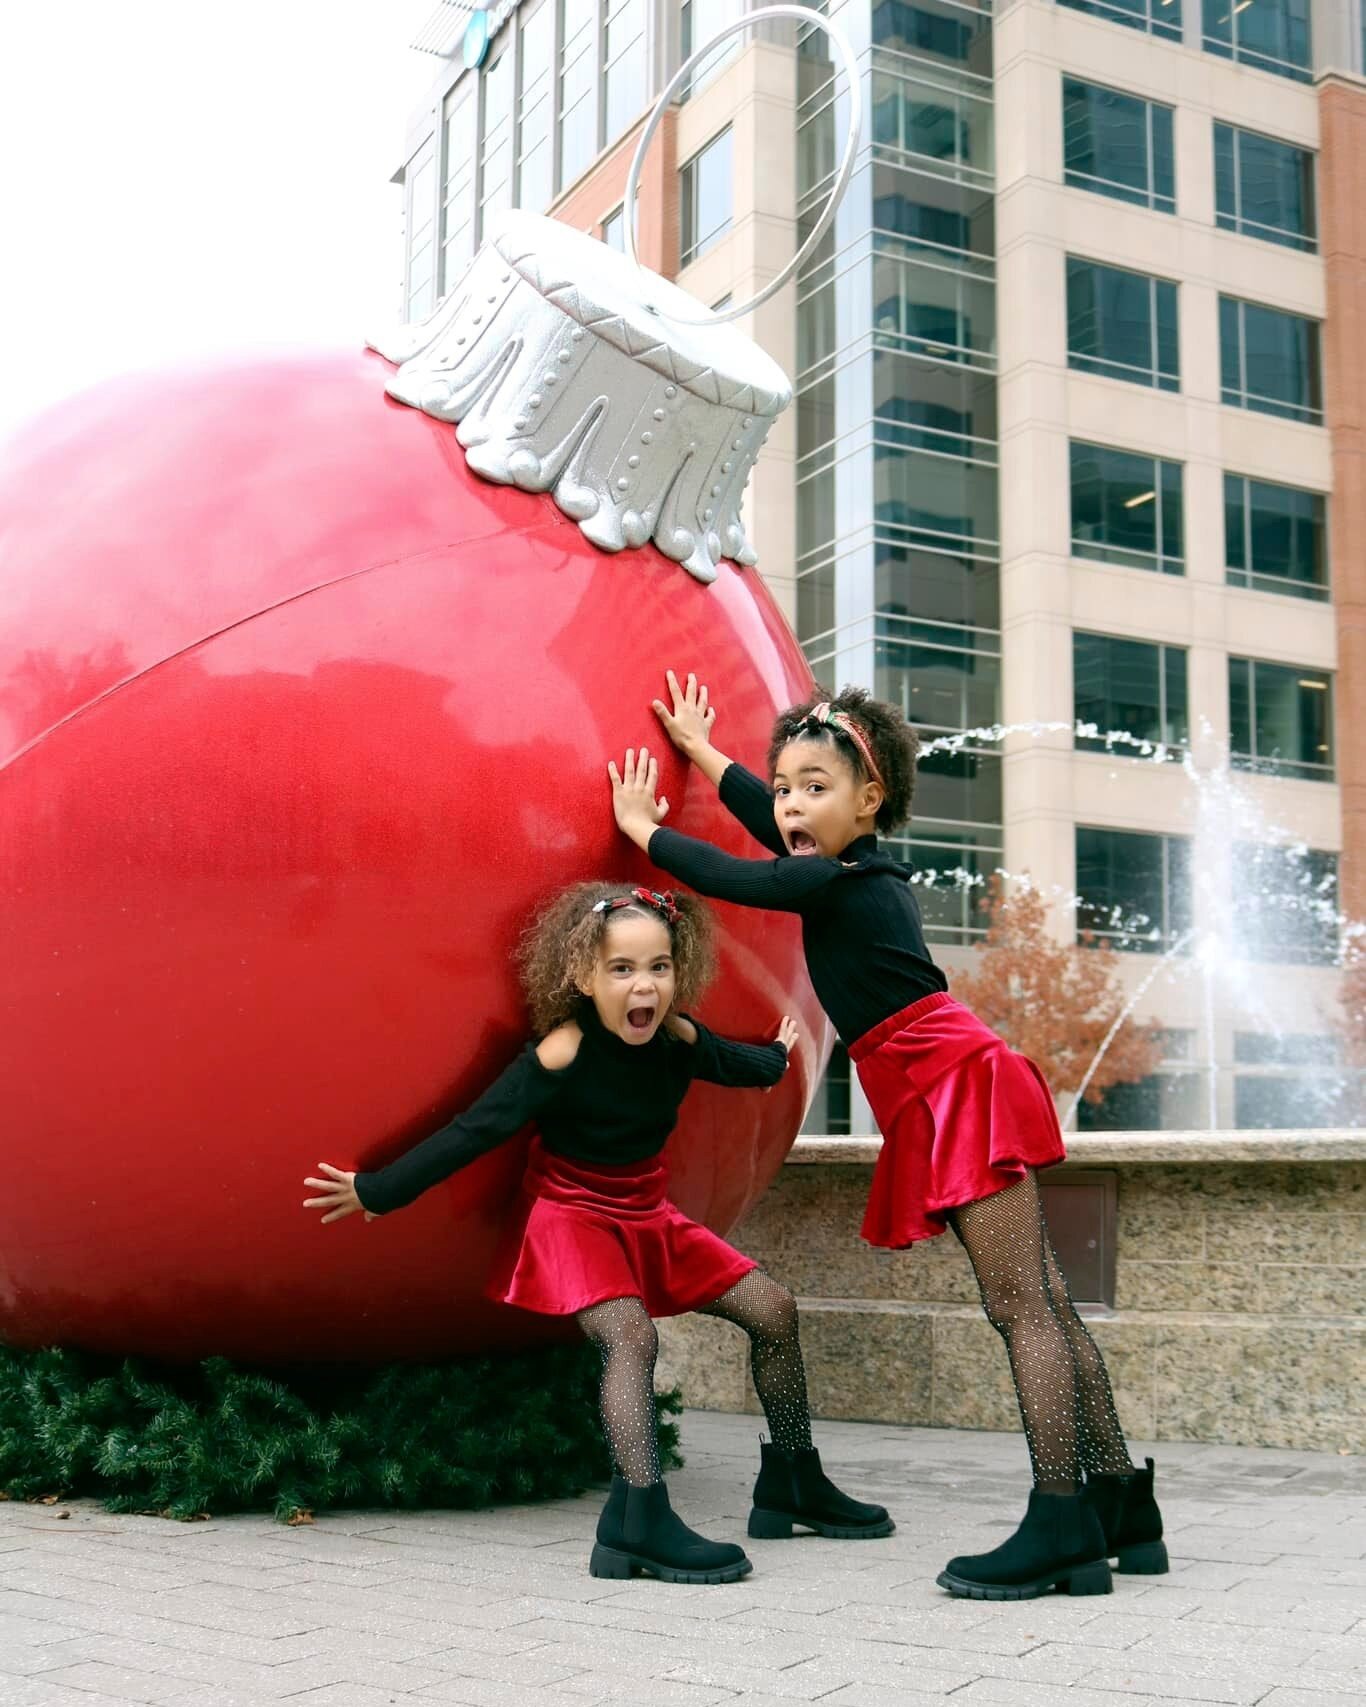 Happy Holidays! How cute are @avajanelle_alirose by our giant red ornament? 🎄✨❤️ Tag us in all your holiday photos for a chance to win a gift card to a #LegacyNorth business of your choosing! 🎁📸 

&bull;
&bull;
&bull;
&bull;
&bull;
#legacynorth #s